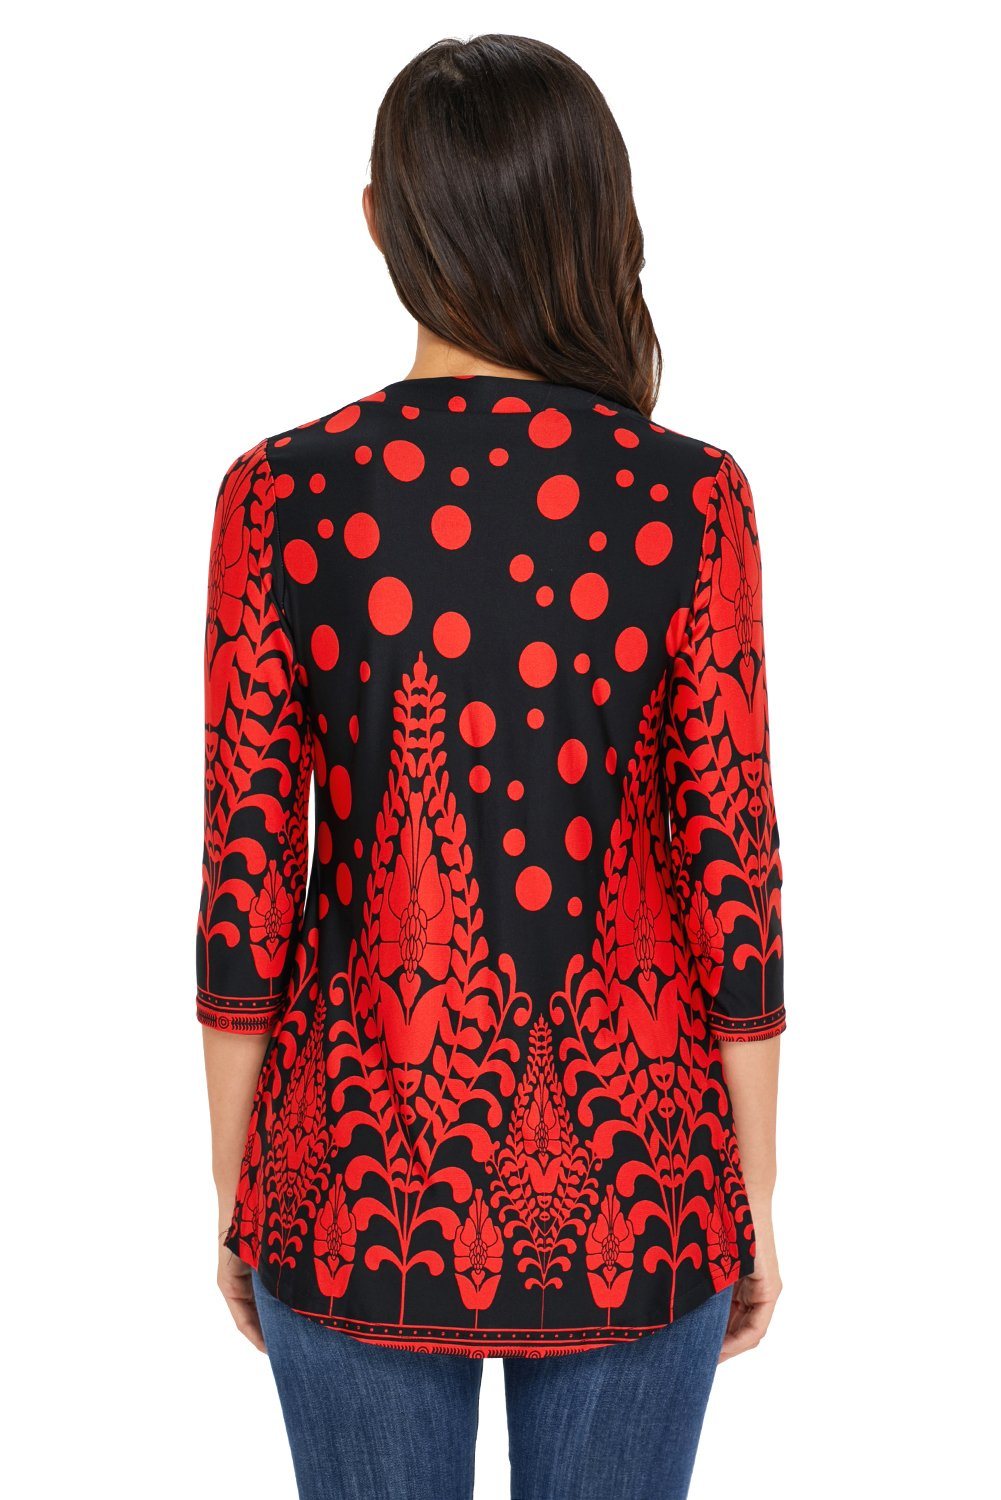 KaleaBoutique Stylish Red Floral Notch Neck Pin-tuck Tunic - KaleaBoutique.com